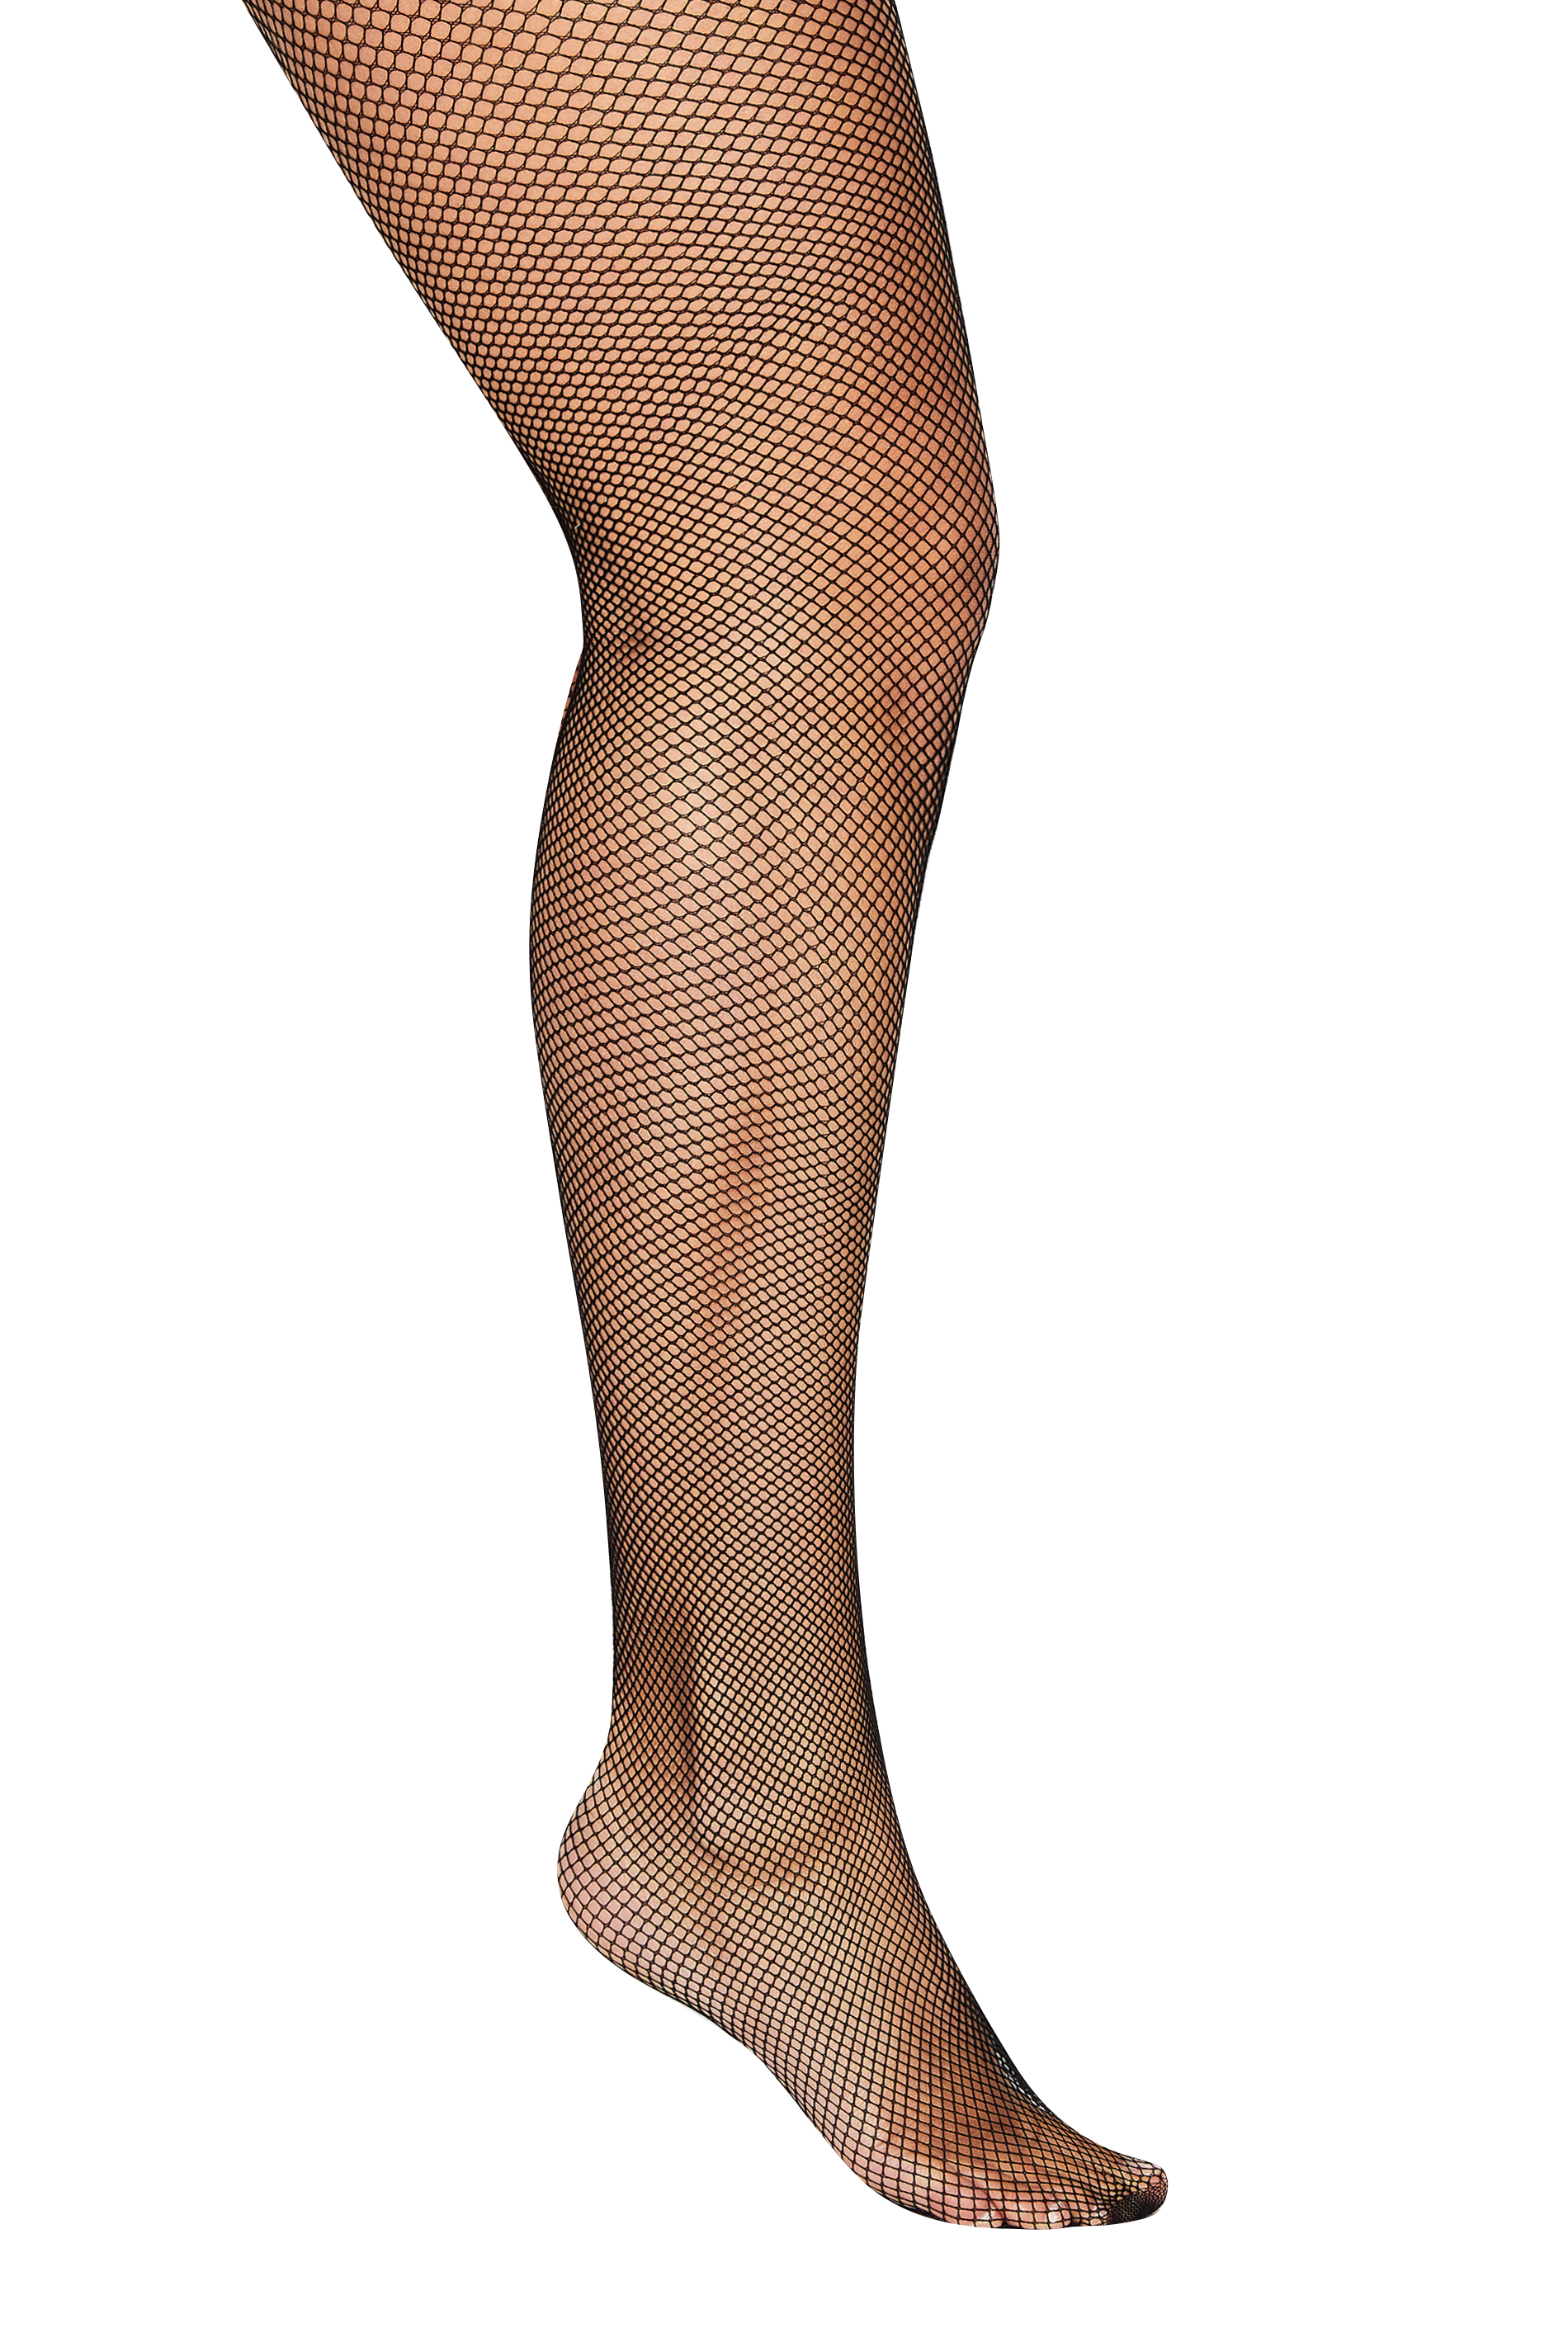 Plus Size Black Fishnet Tights | Yours Clothing 3